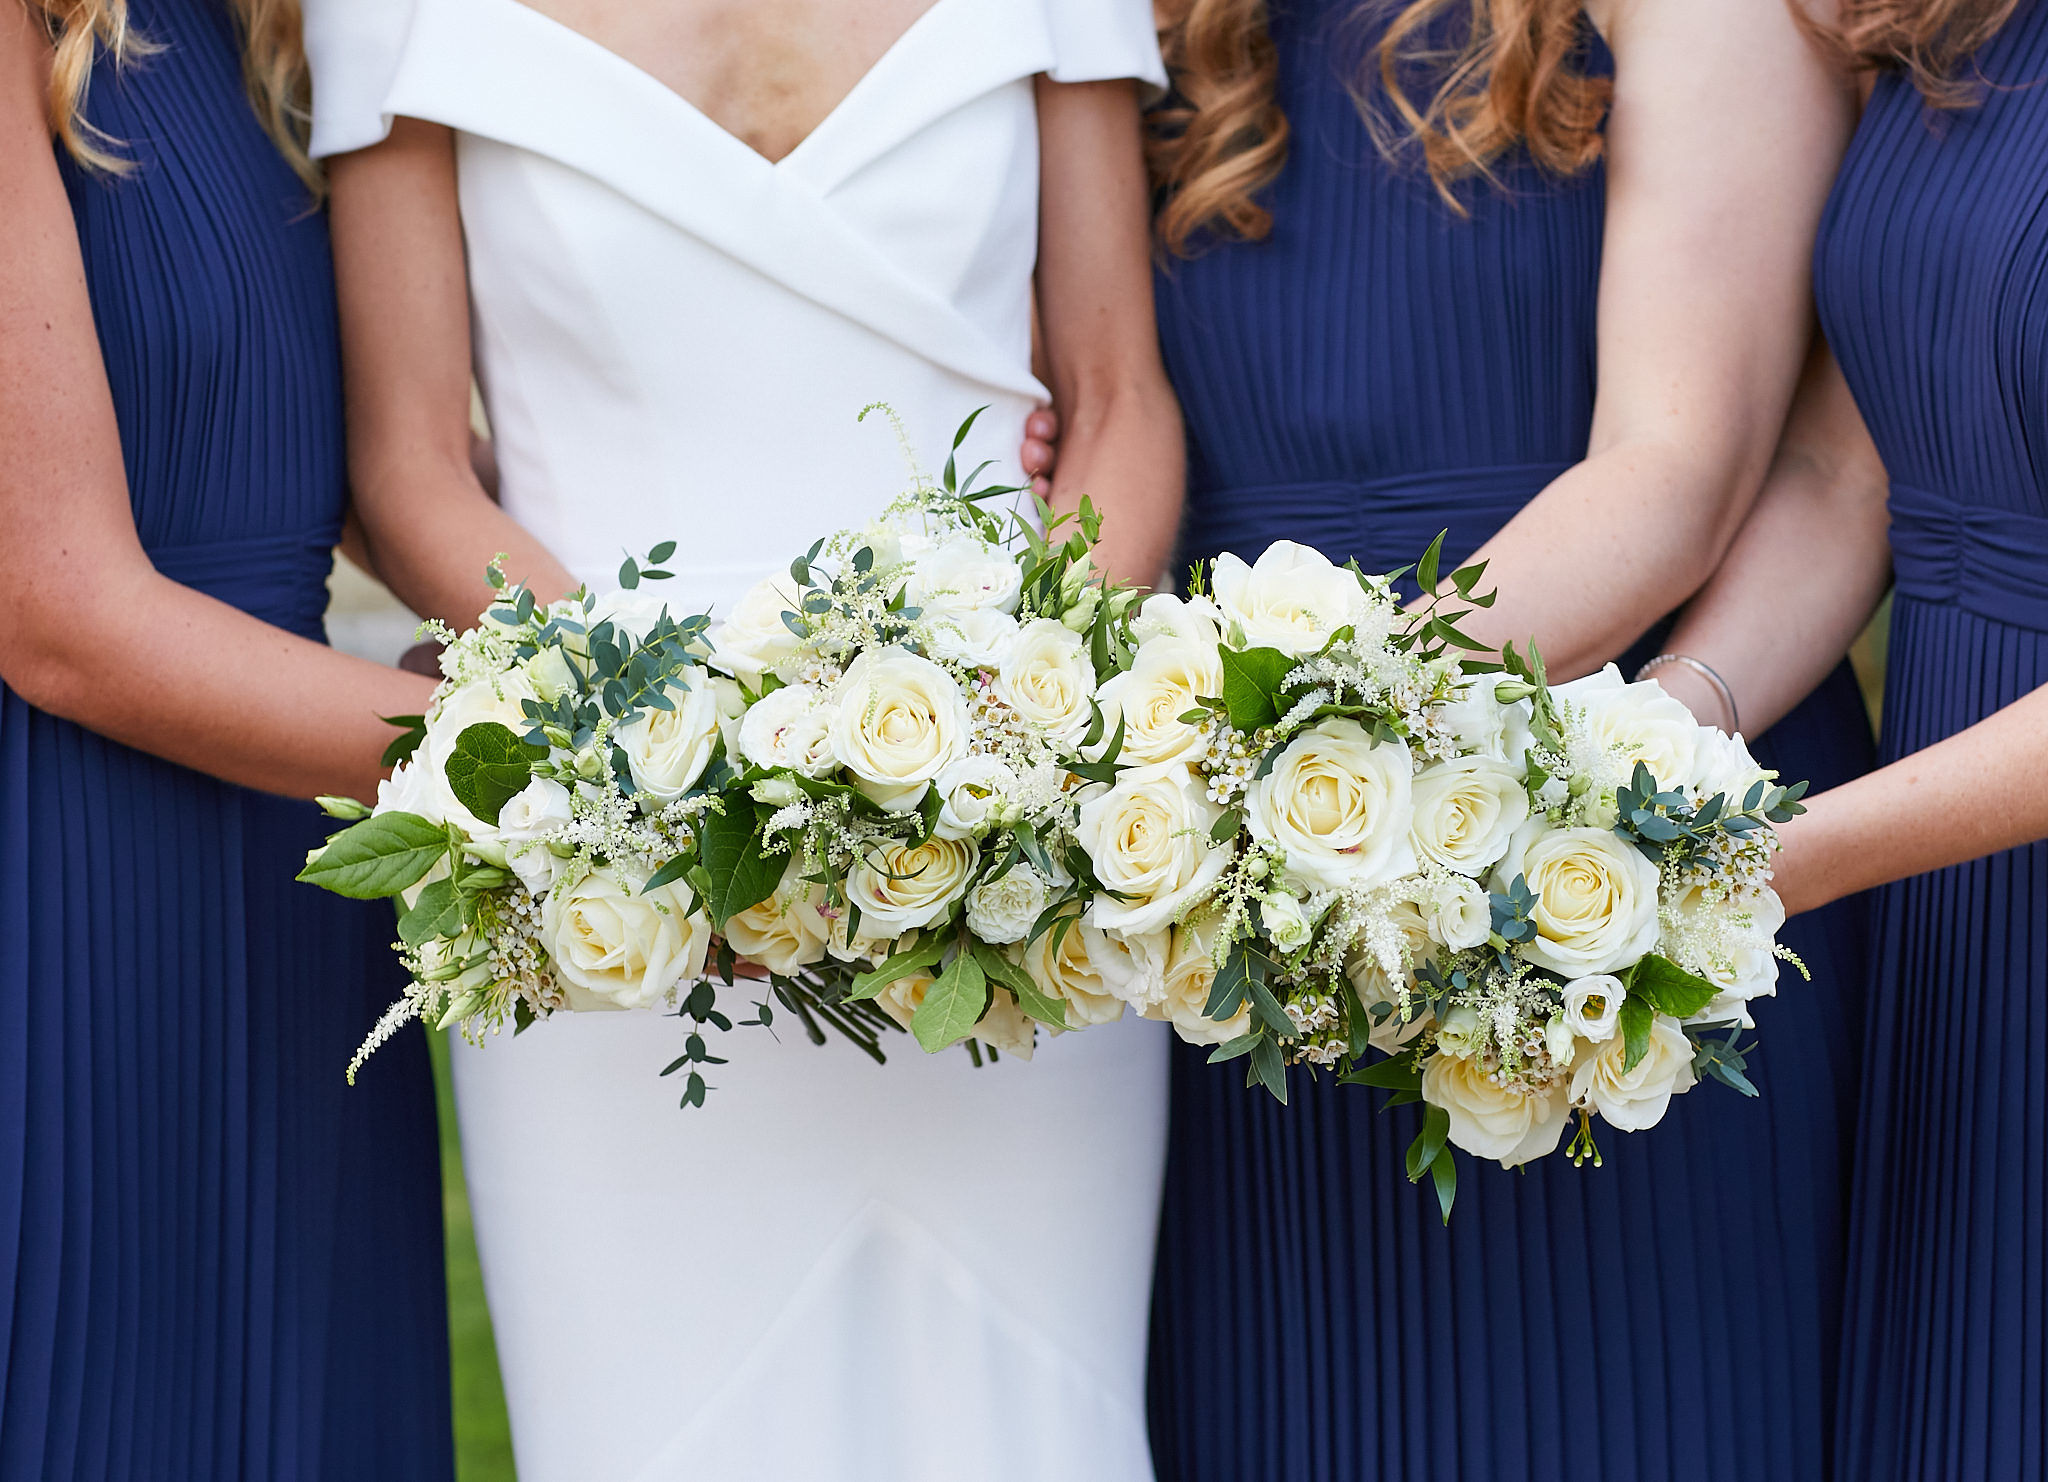 Bride and bridesmaids holding their bouquets